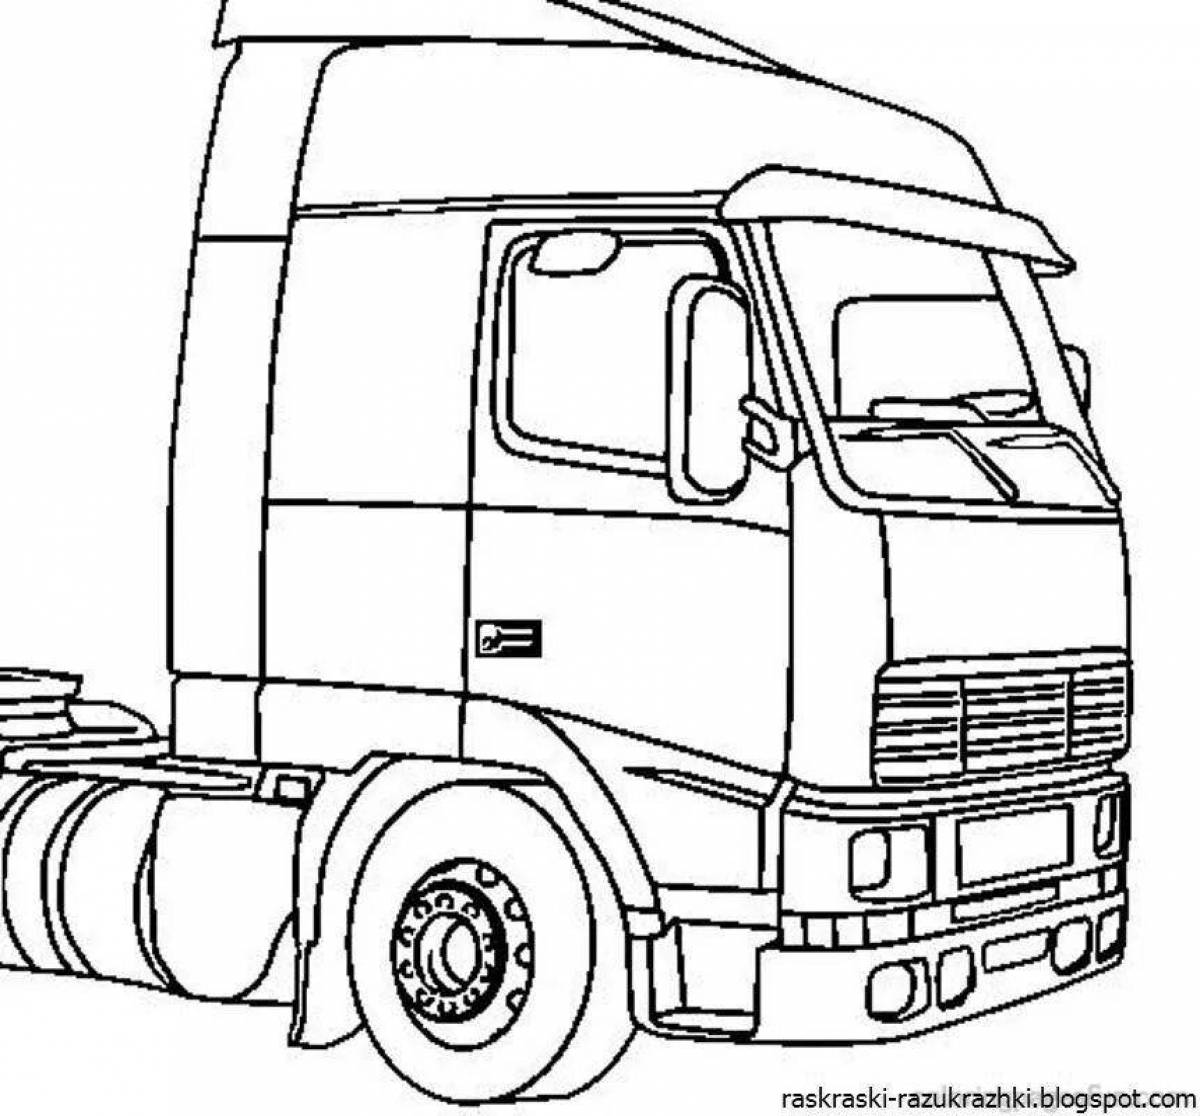 Great truck coloring page